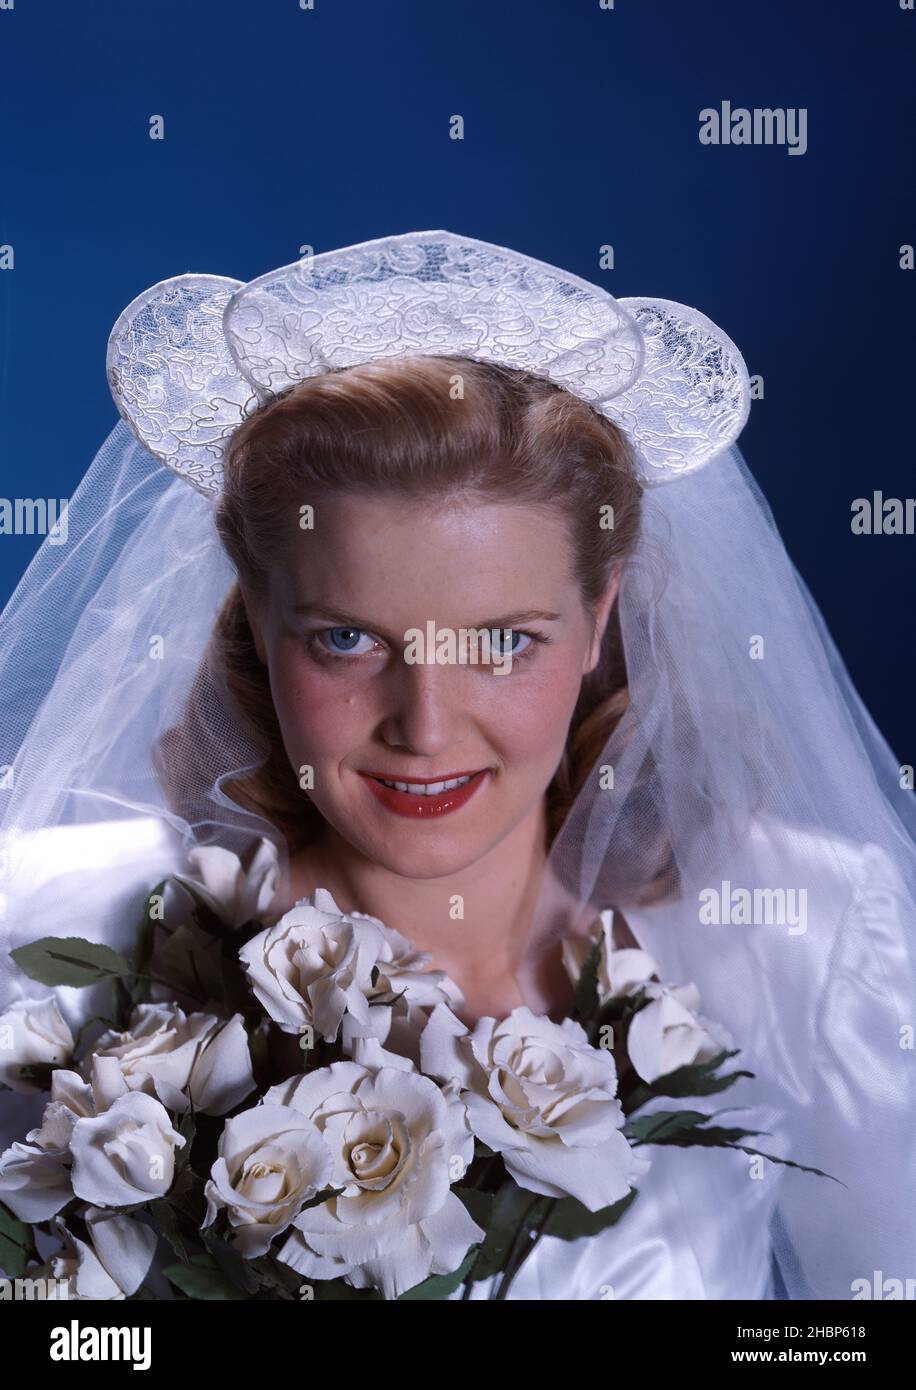 Close up portrait of bride holding white roses Stock Photo